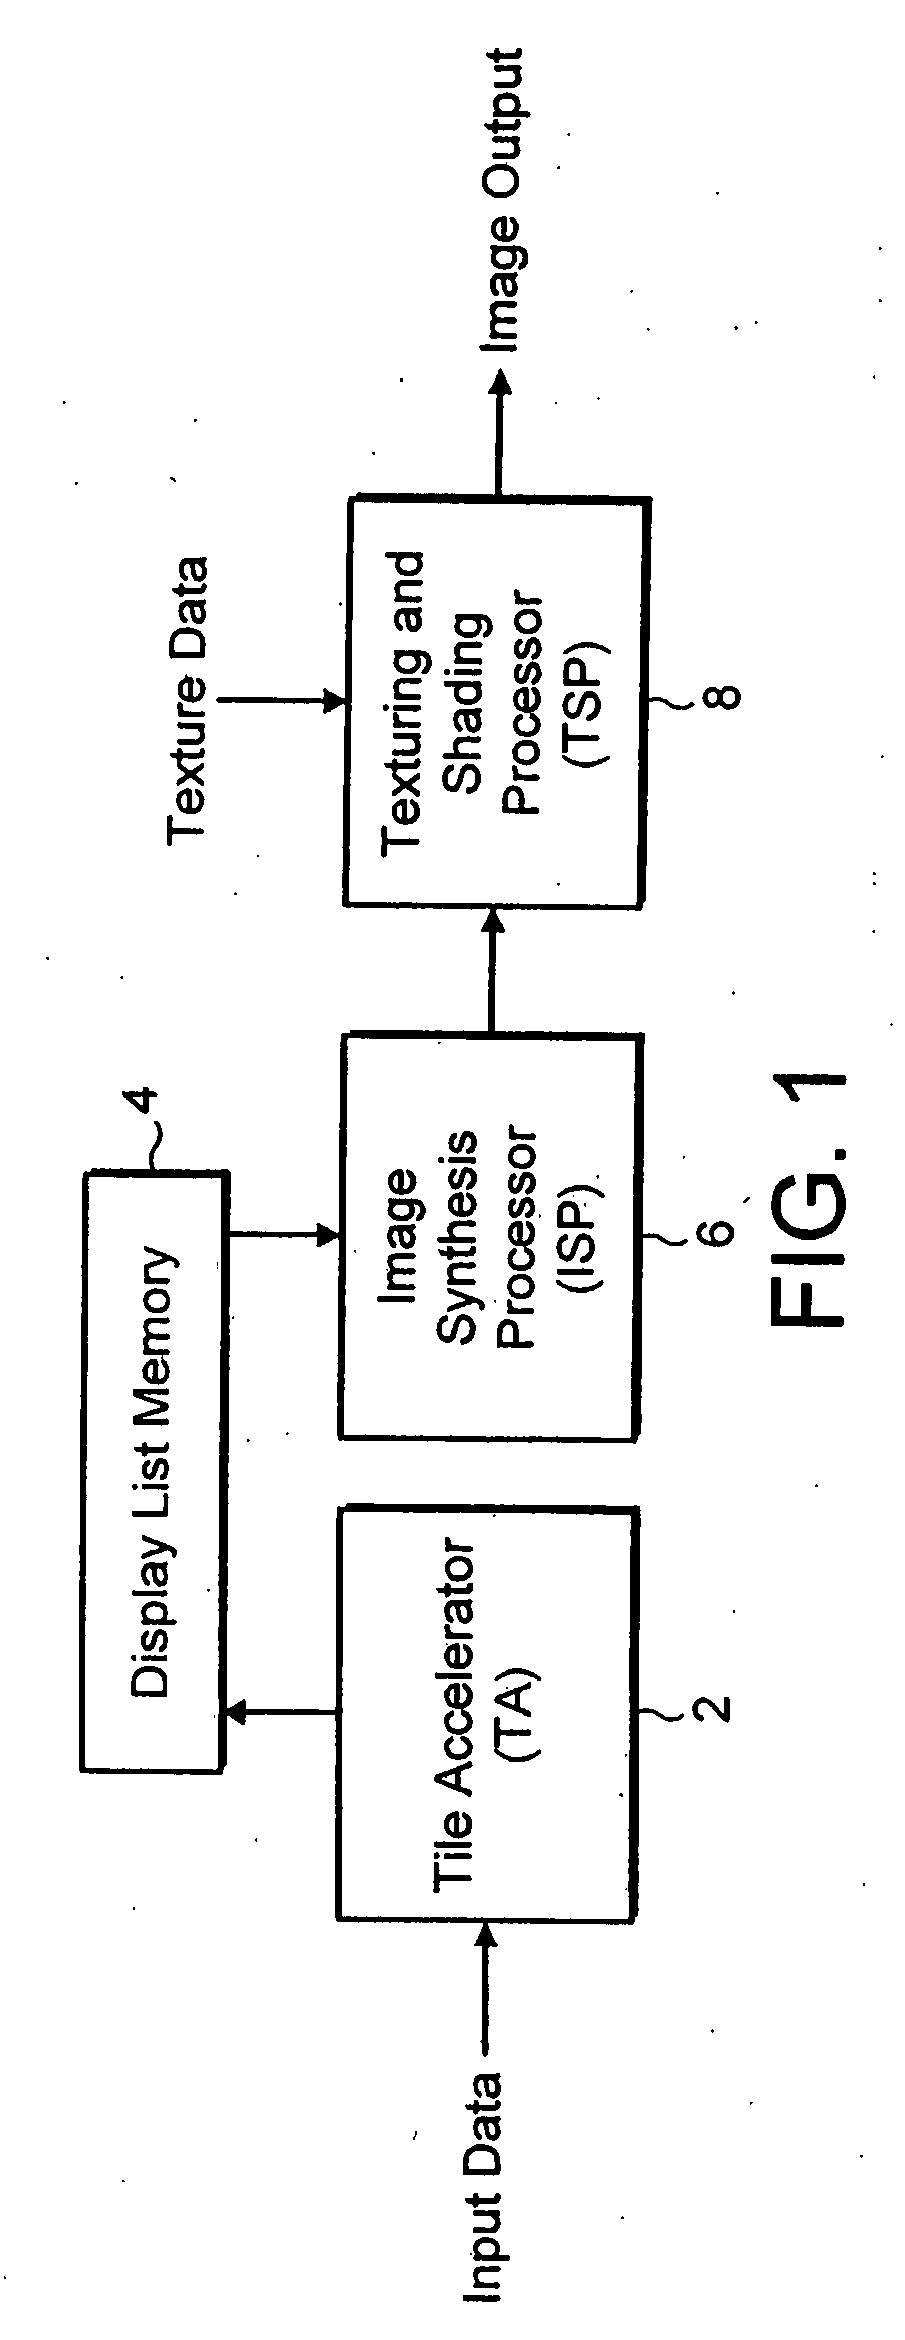 Memory management for systems for generating 3-dimensional computer images